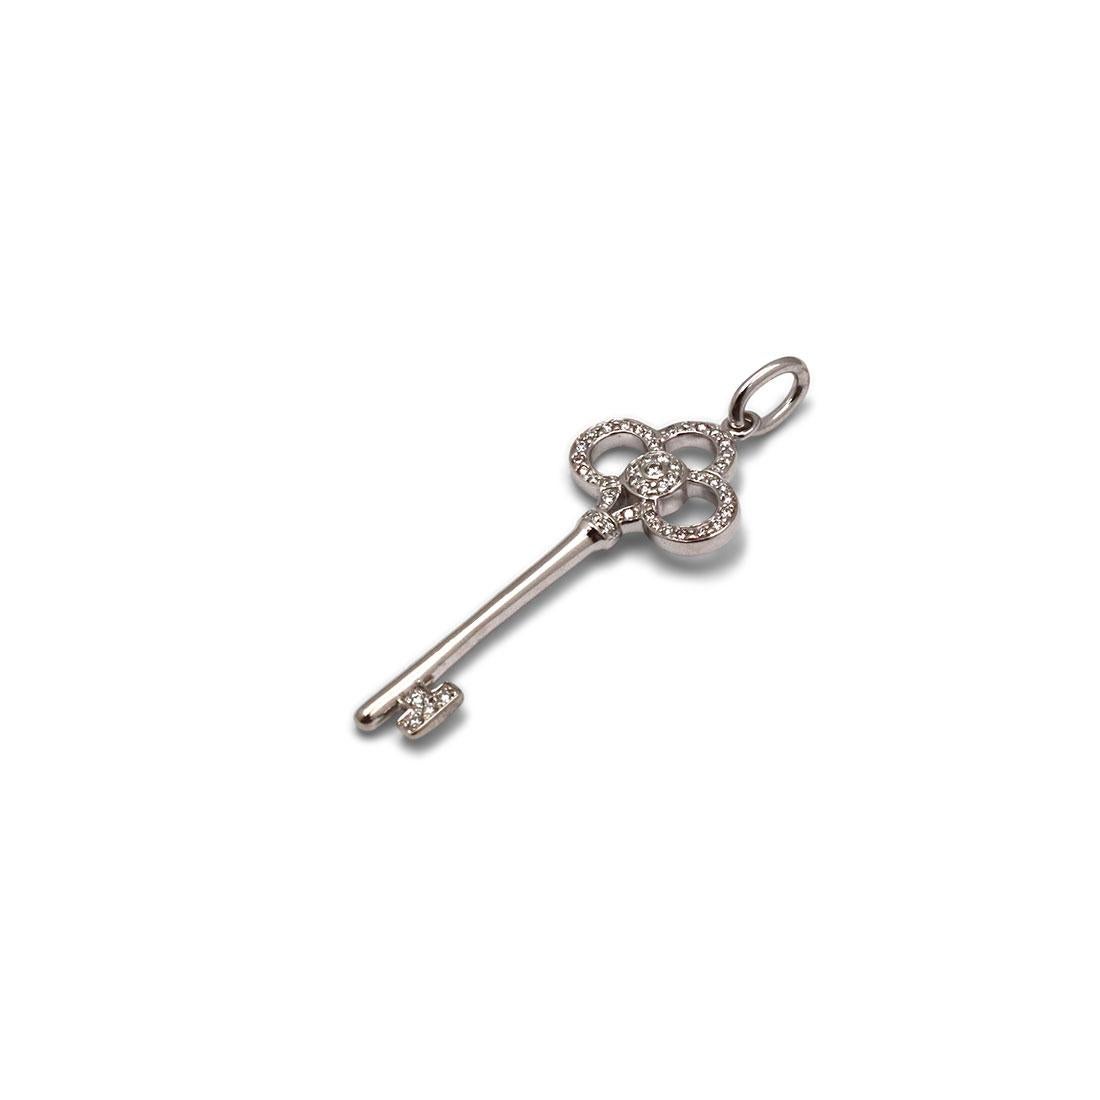 Authentic Tiffany & Co. 'Crown Key' pendant crafted in 18 karat white gold features and set with an estimated 0.13 carats of round brilliant cut diamonds (E-F, VS). This stunning pendant measures 1.5 inches in length. Signed Tiffany & Co., 750. The